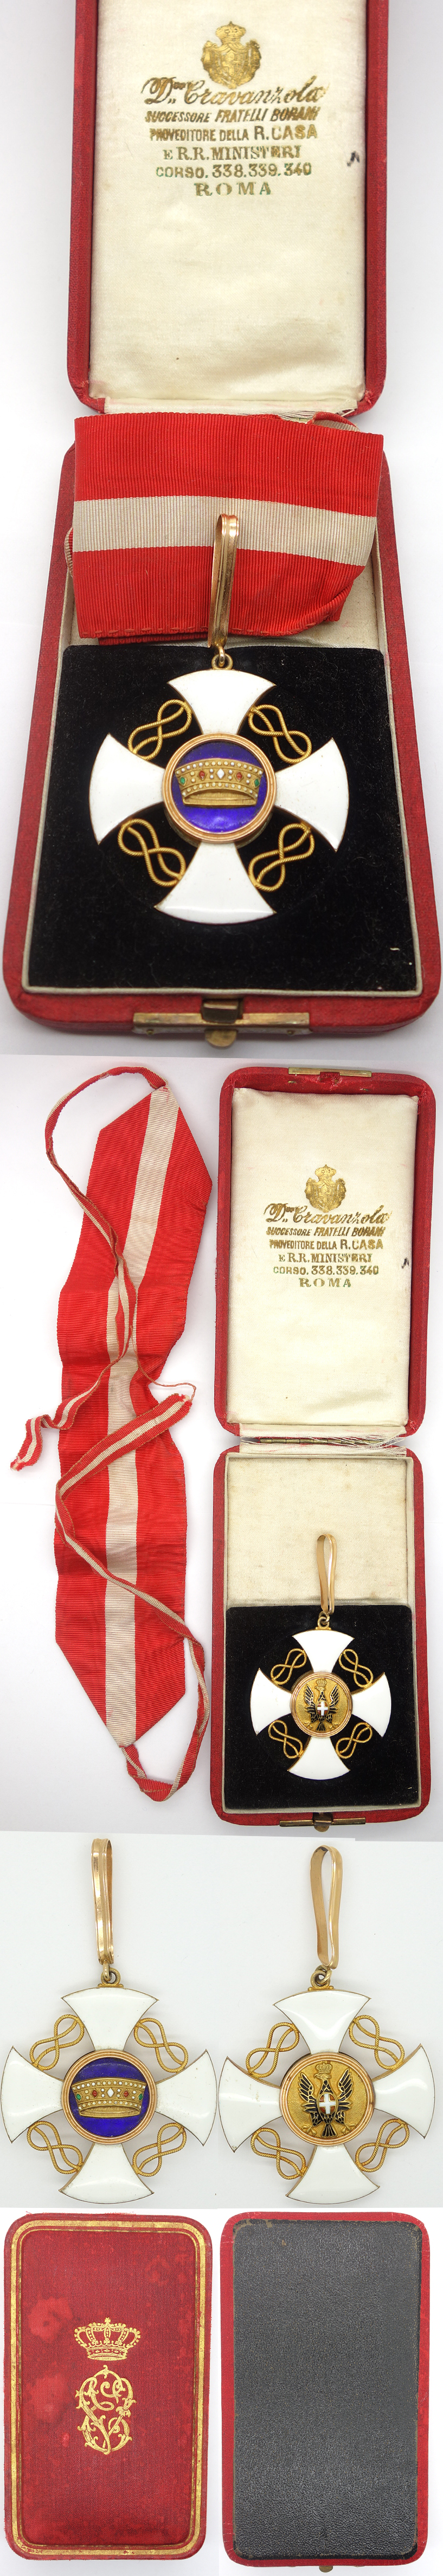 Italian Order of the Crown of Italy in Gold- Commander